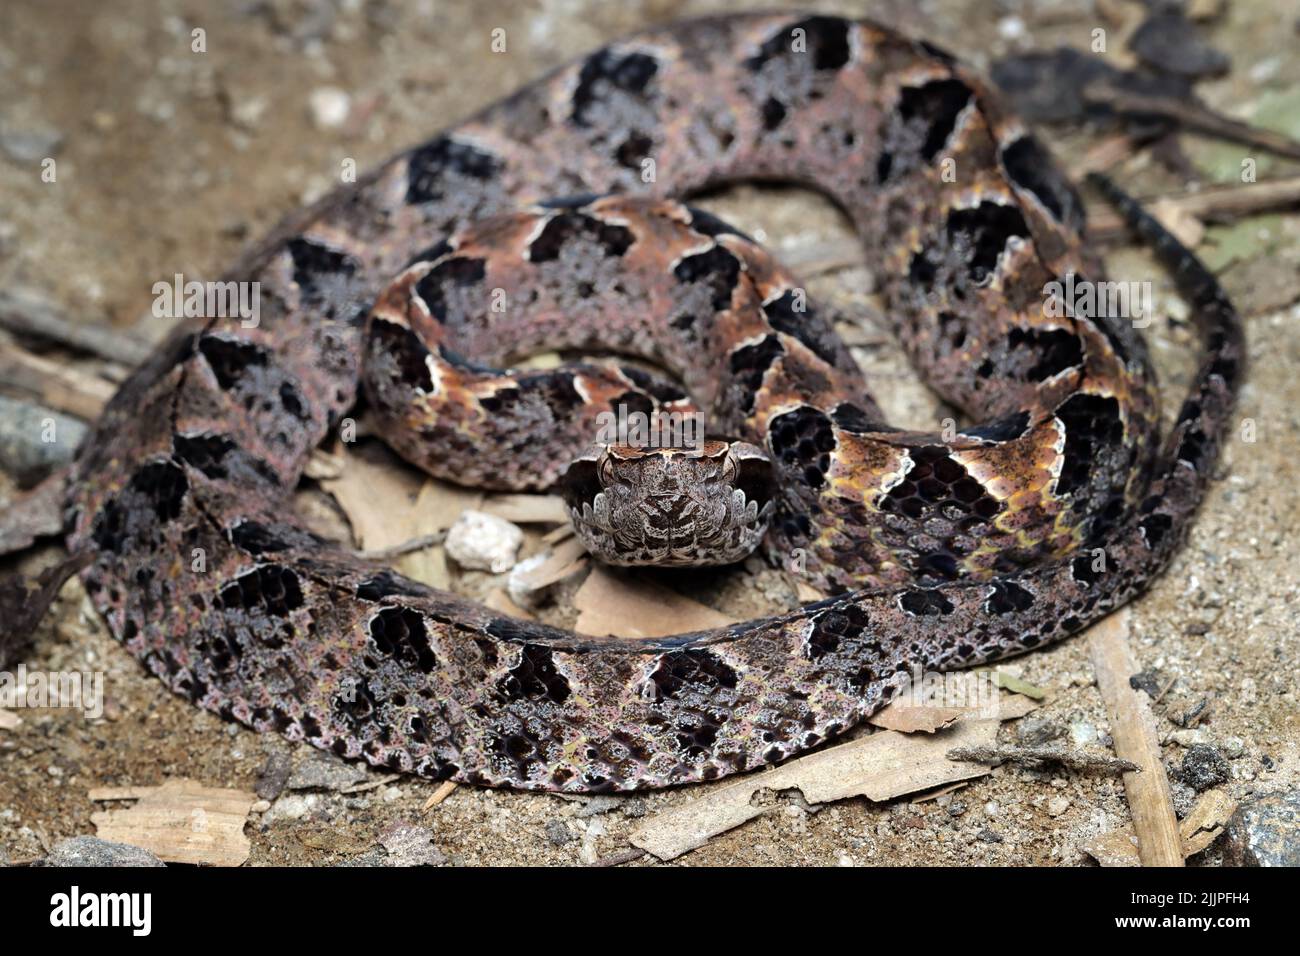 Close-Up of a pit viper snake on dry leaves, Indonesia Stock Photo